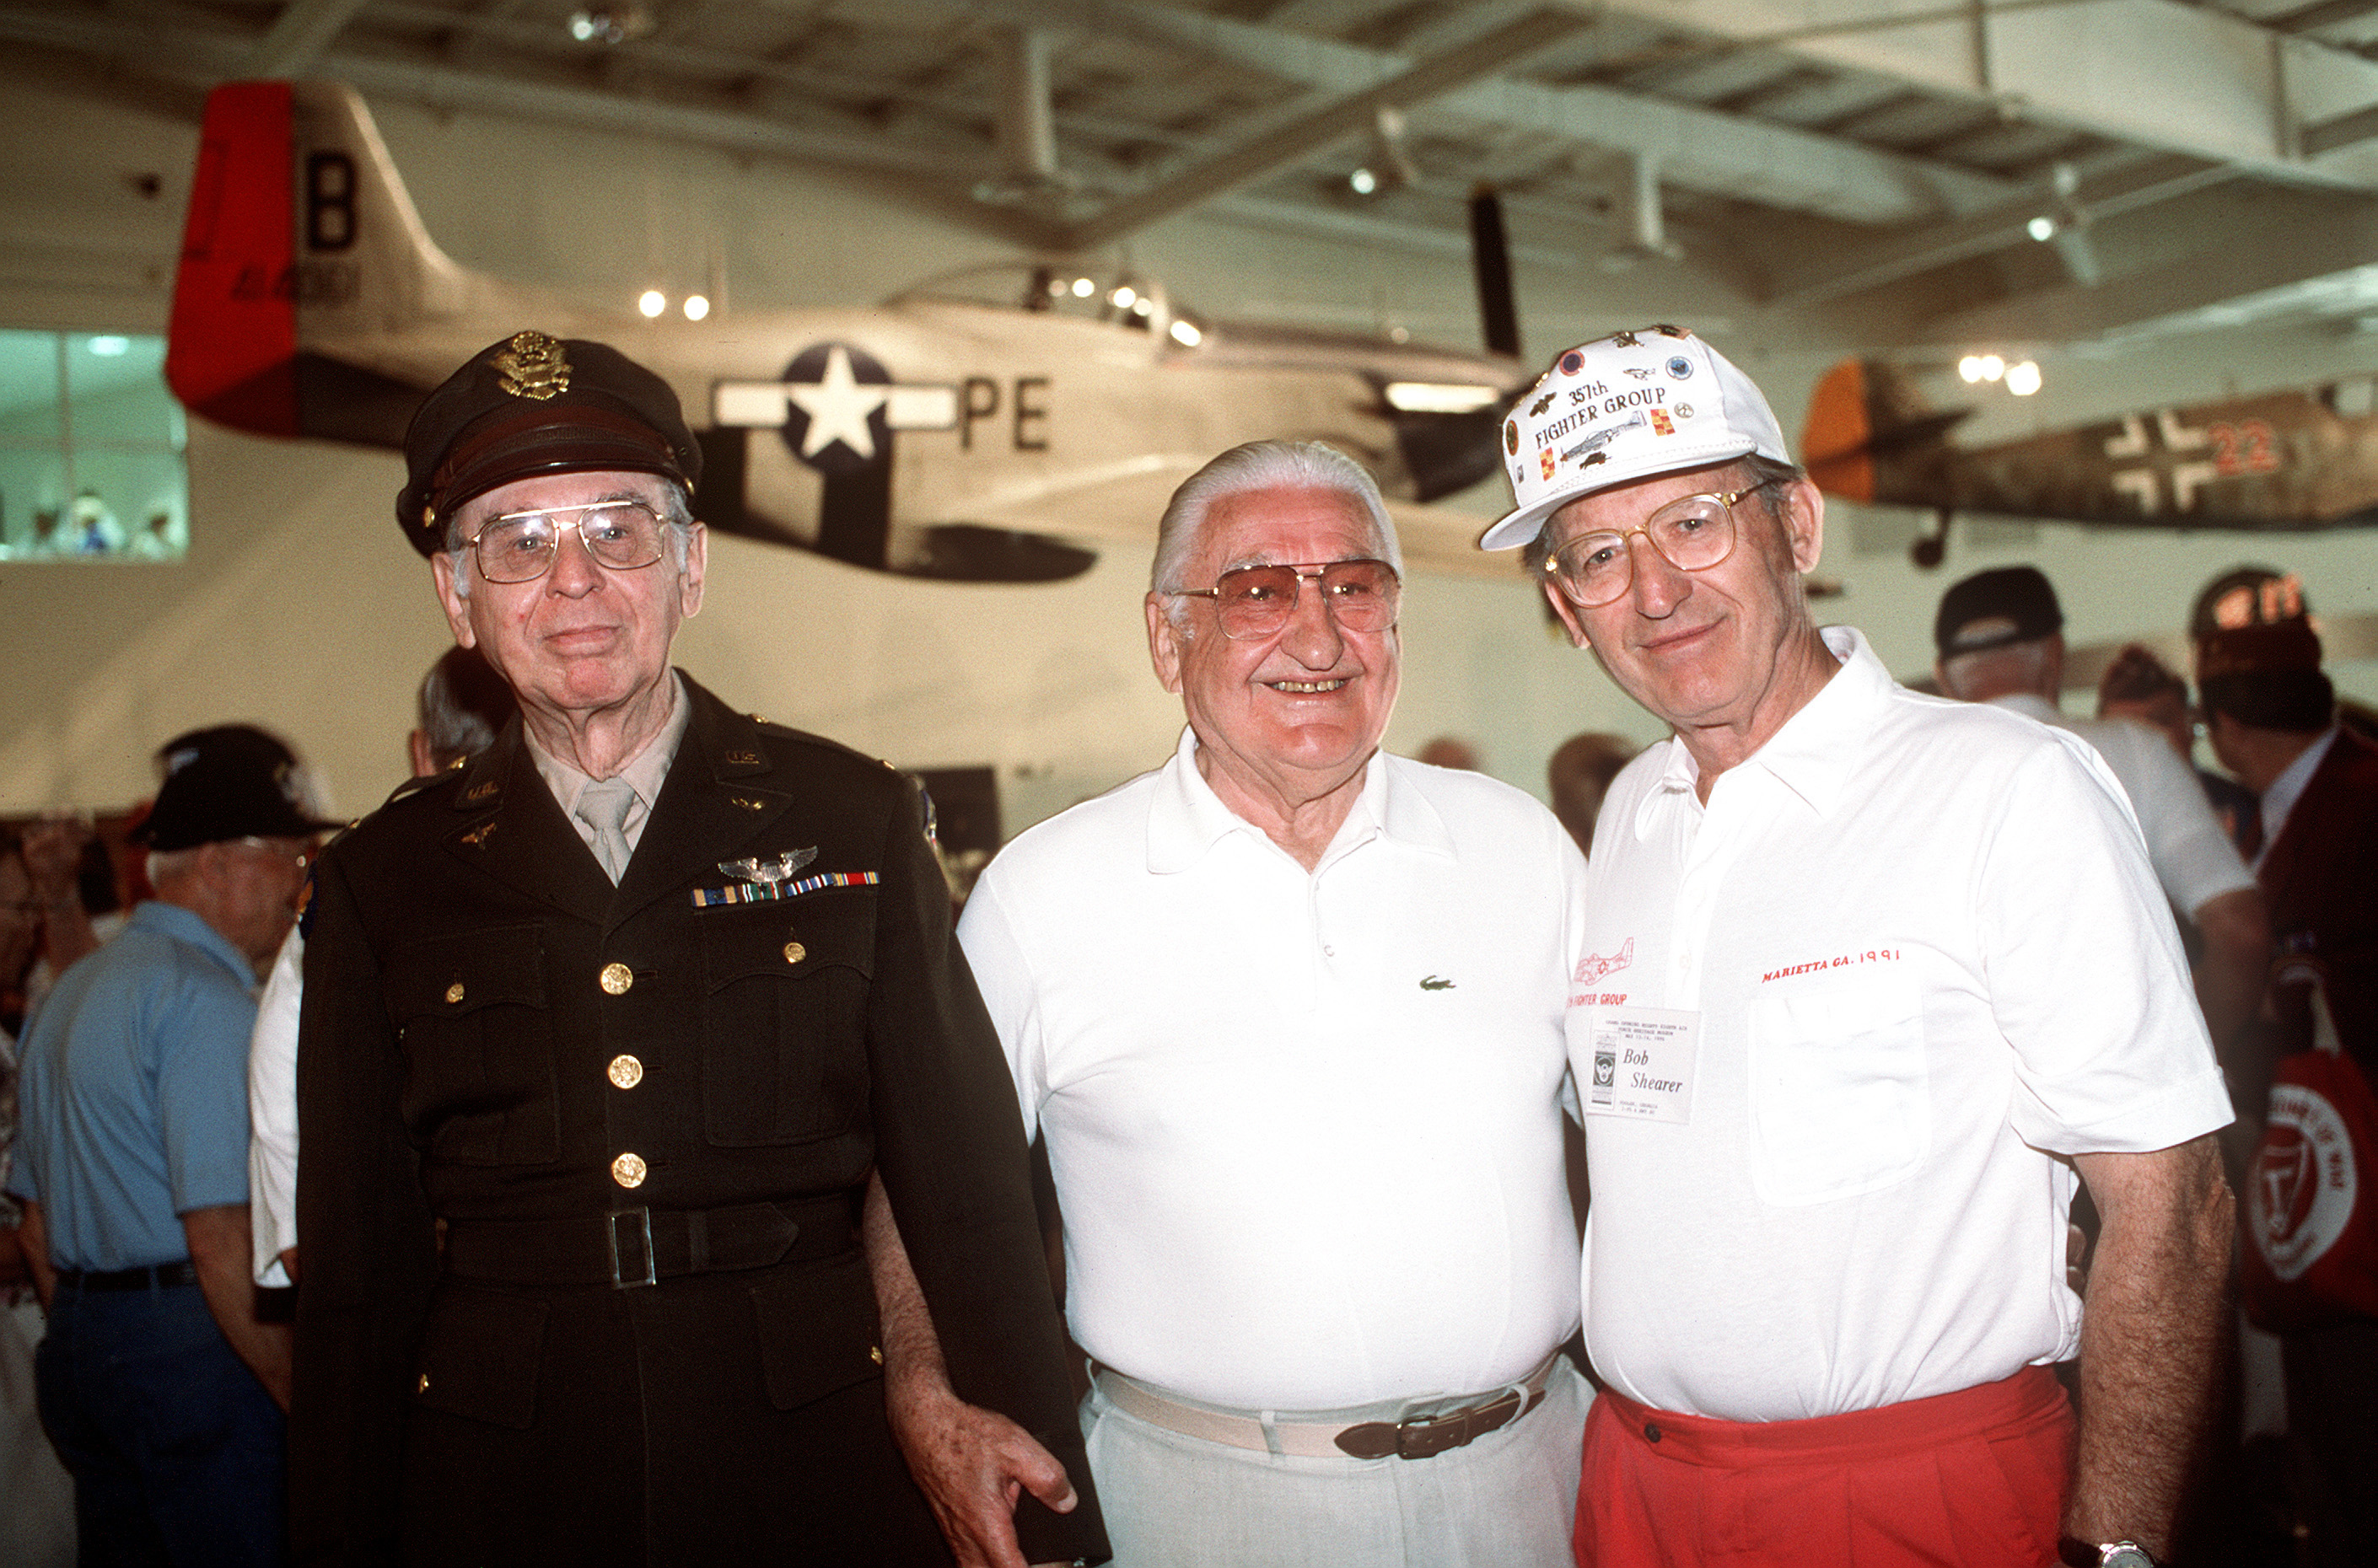 Francis Gabreski (center) with two other 8th Air Force veterans, National Museum of the Mighty Eighth Air Force, Pooler, Georgia, United States, 14 May 1996